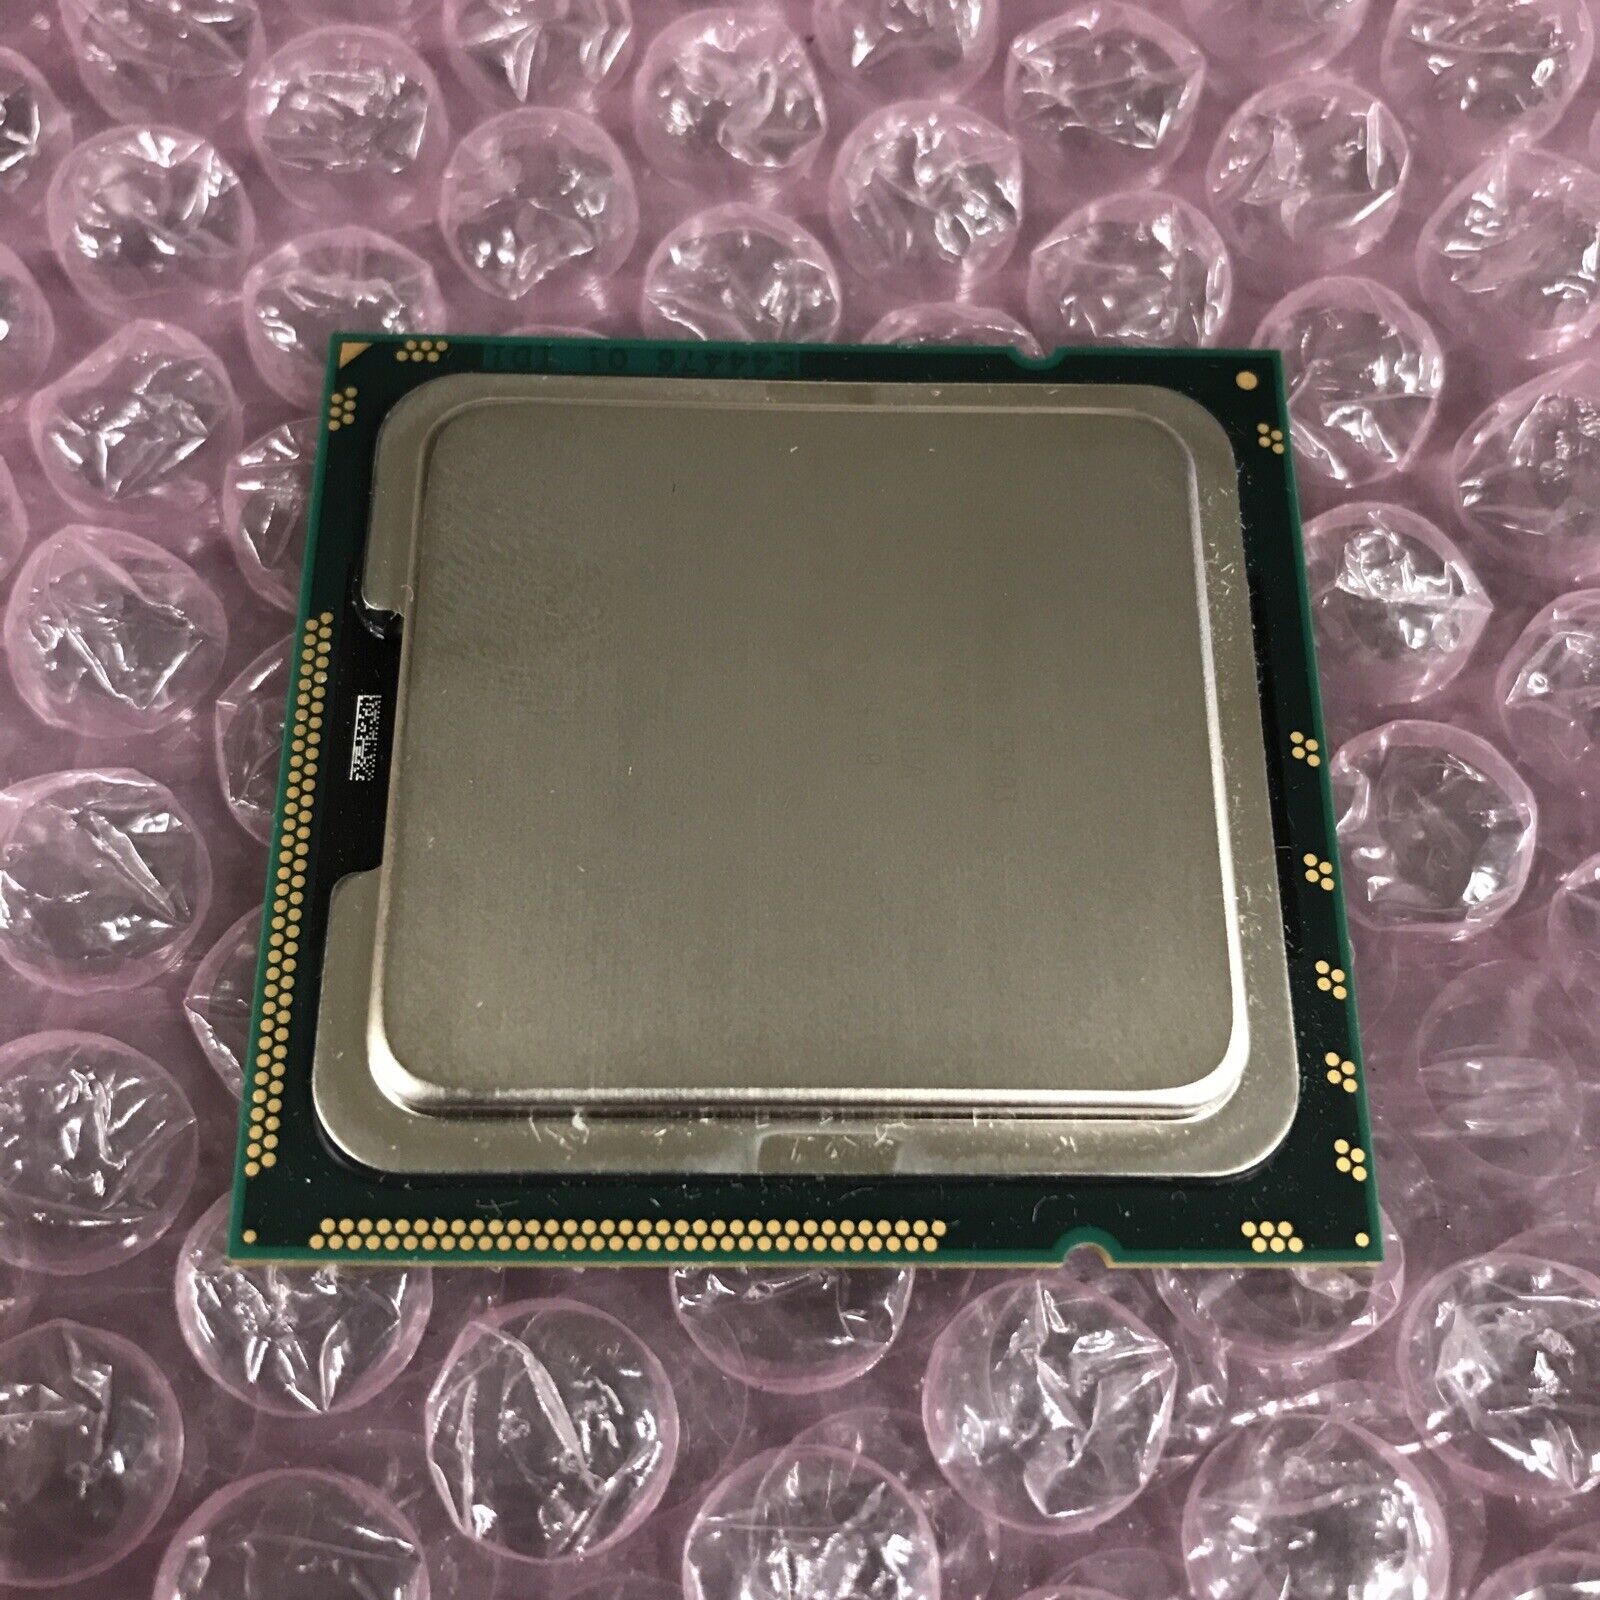 Intel Xeon E5503 SLBKD 2.00GHZ (Tested and Working)